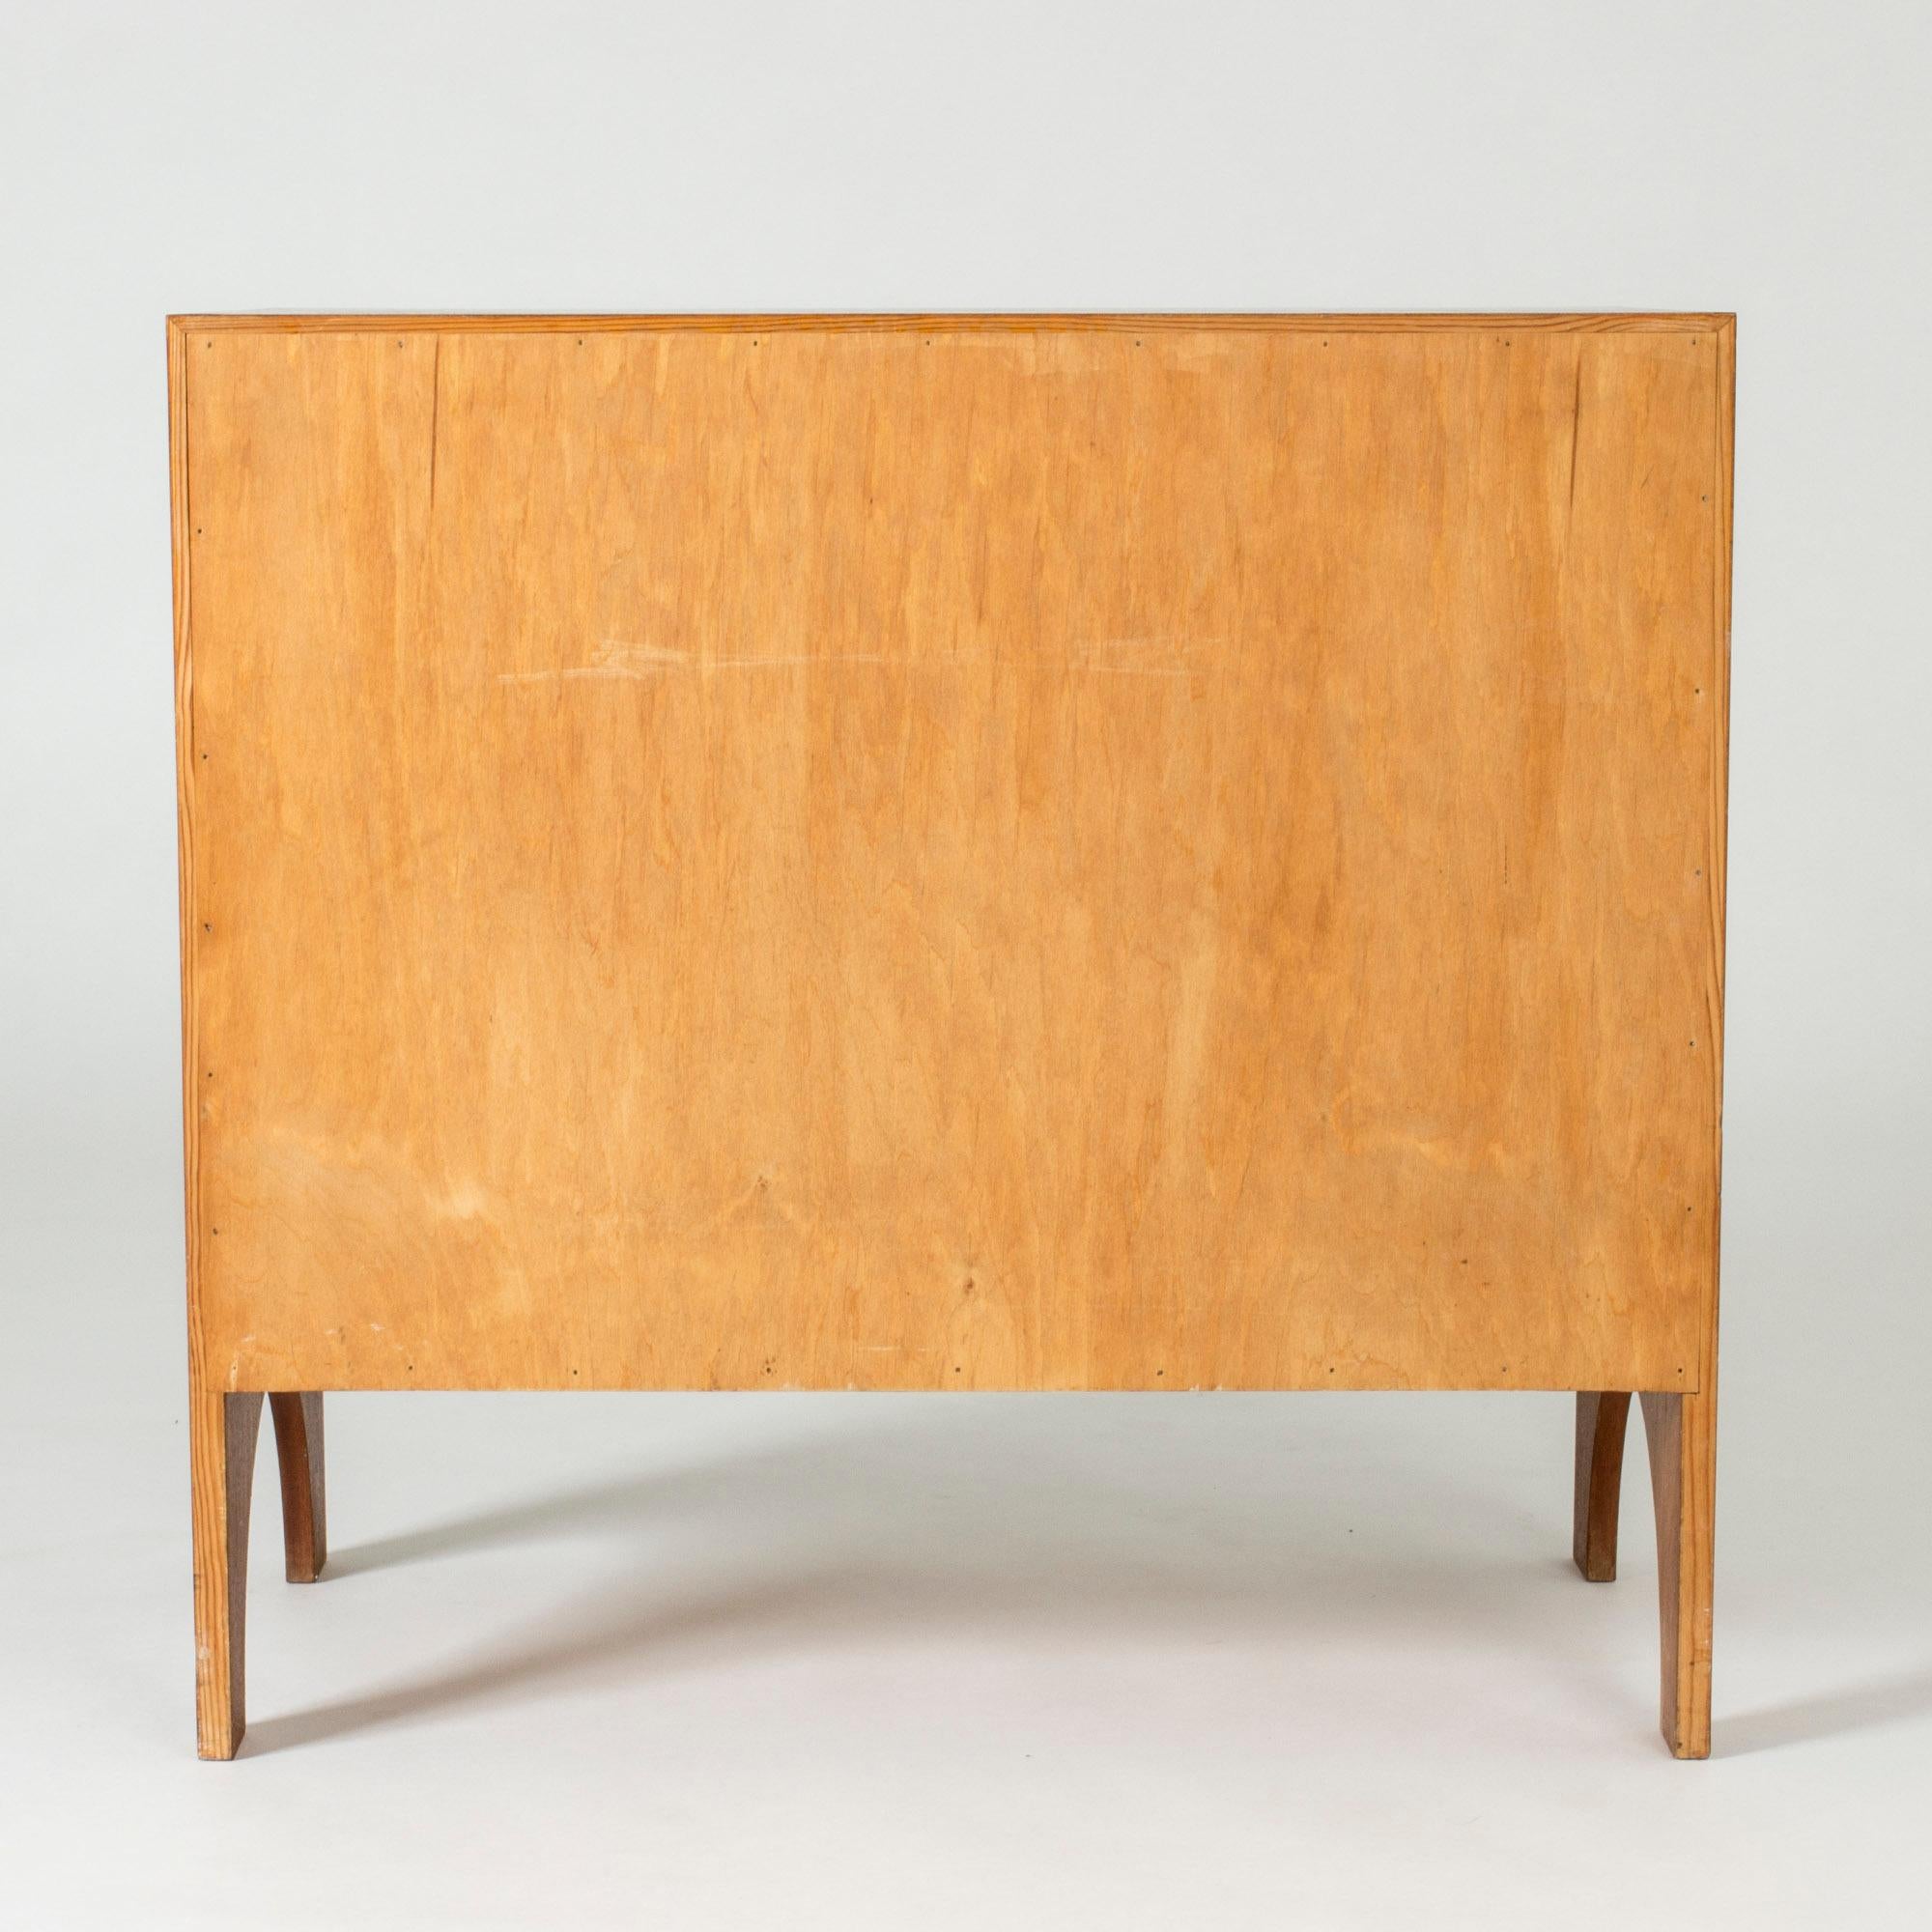 Mahogany and Brass Chest of Drawers by Josef Frank for Svenskt Tenn, Sweden For Sale 1